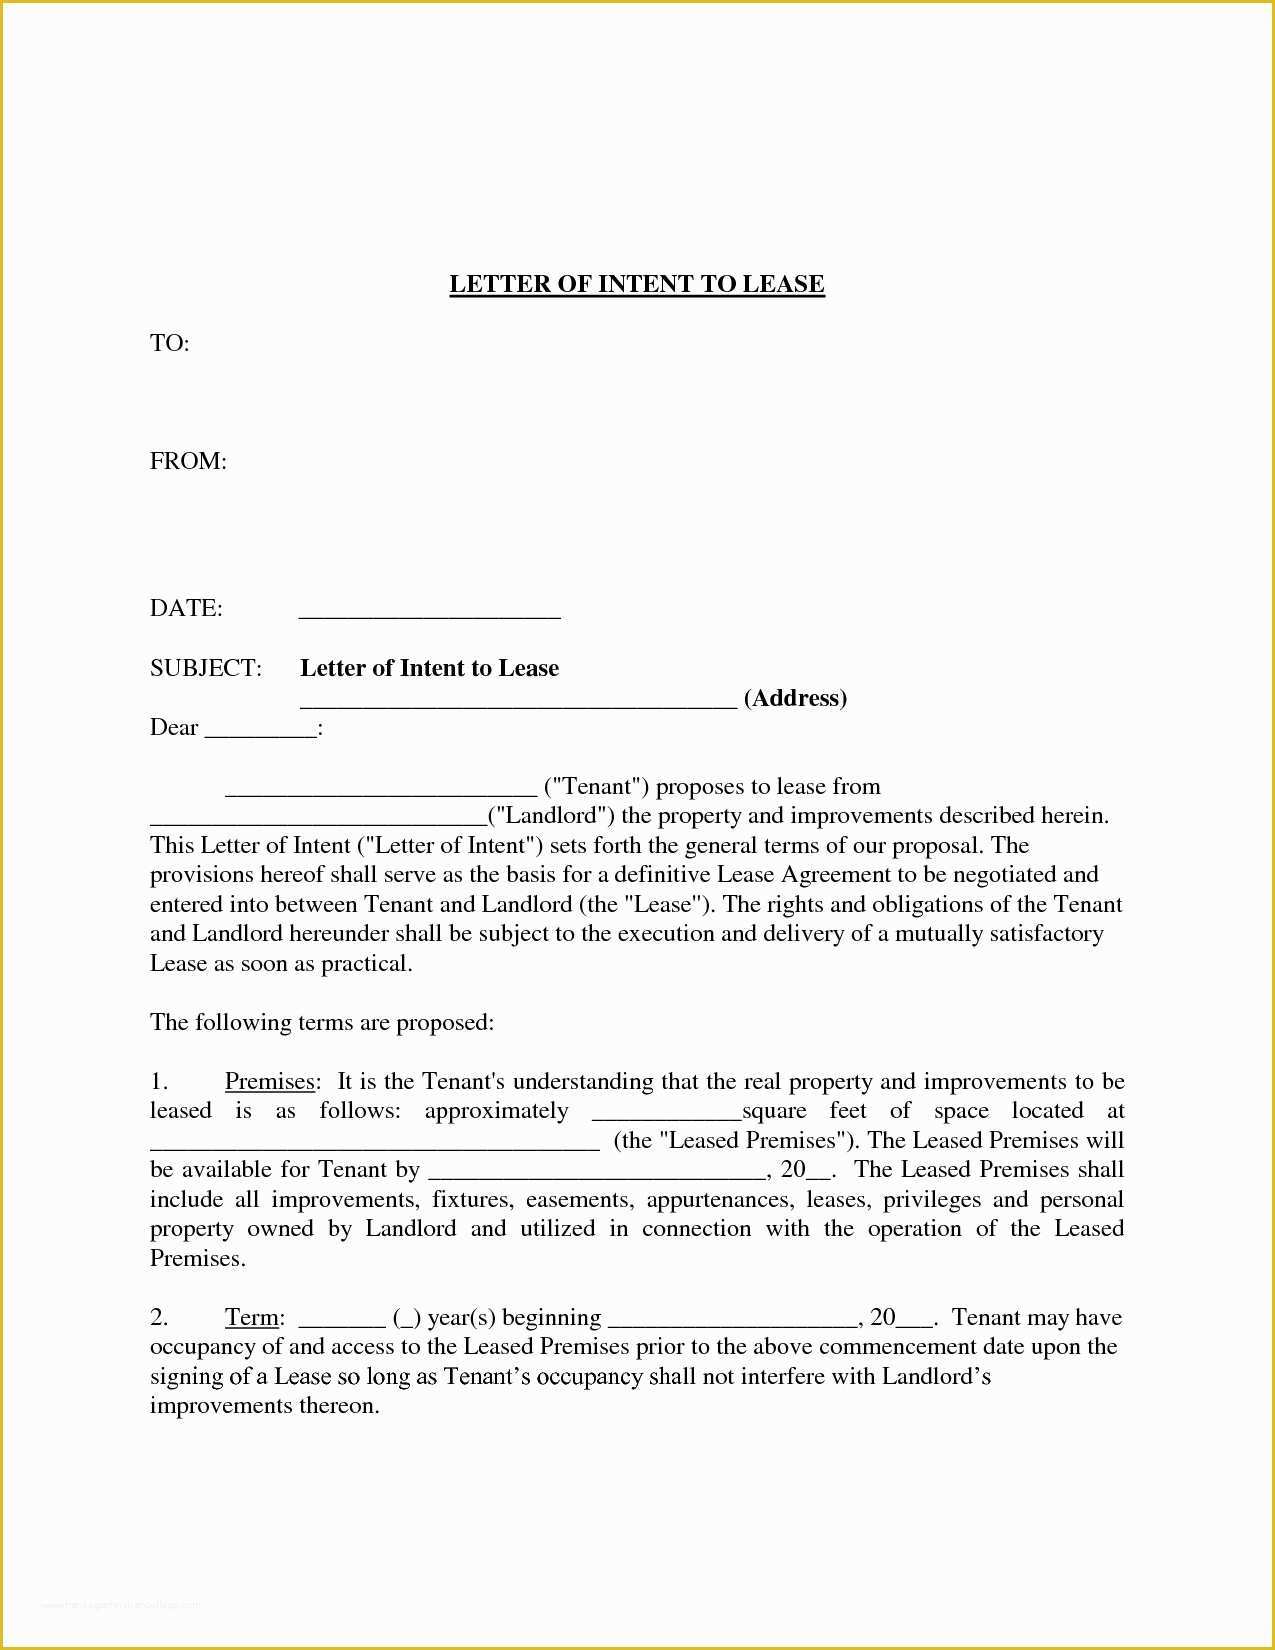 Letter Of Intent to Lease Template Free Of Free Letter Intent to Lease Mercial Space Template